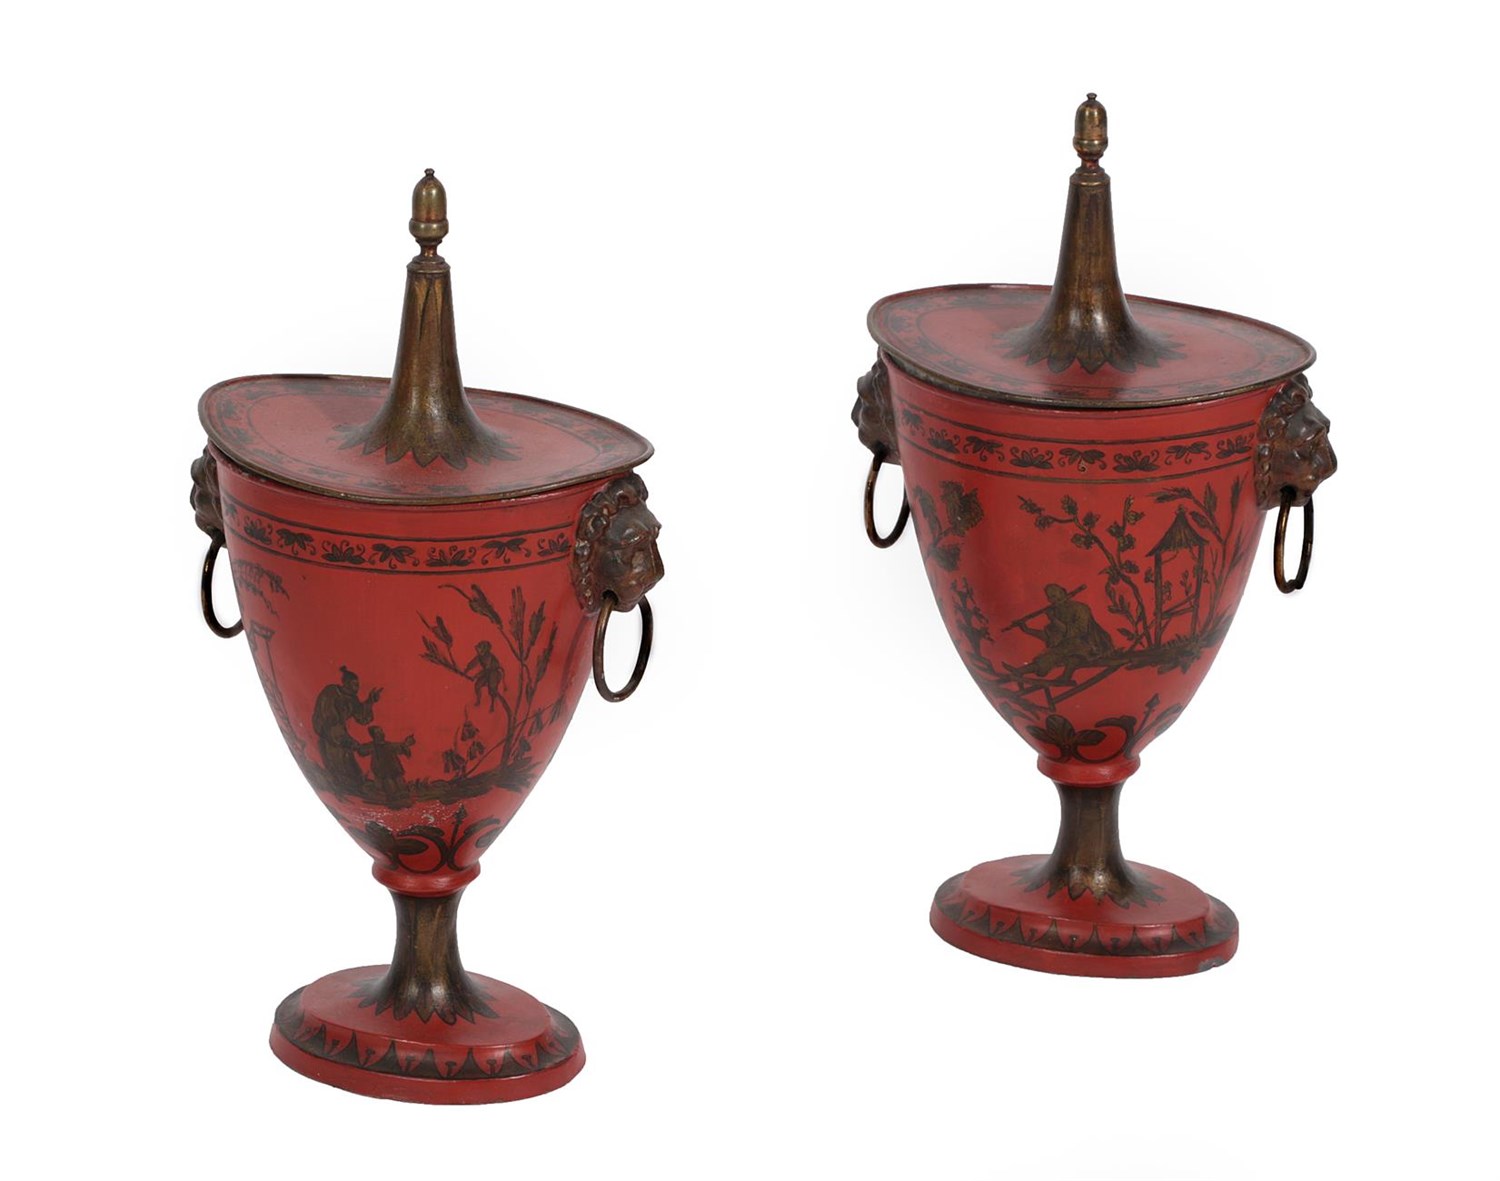 Lot 85 - A Pair of Toleware Chestnut Urns and Covers, in Regency style, with acorn finials and lion mask and